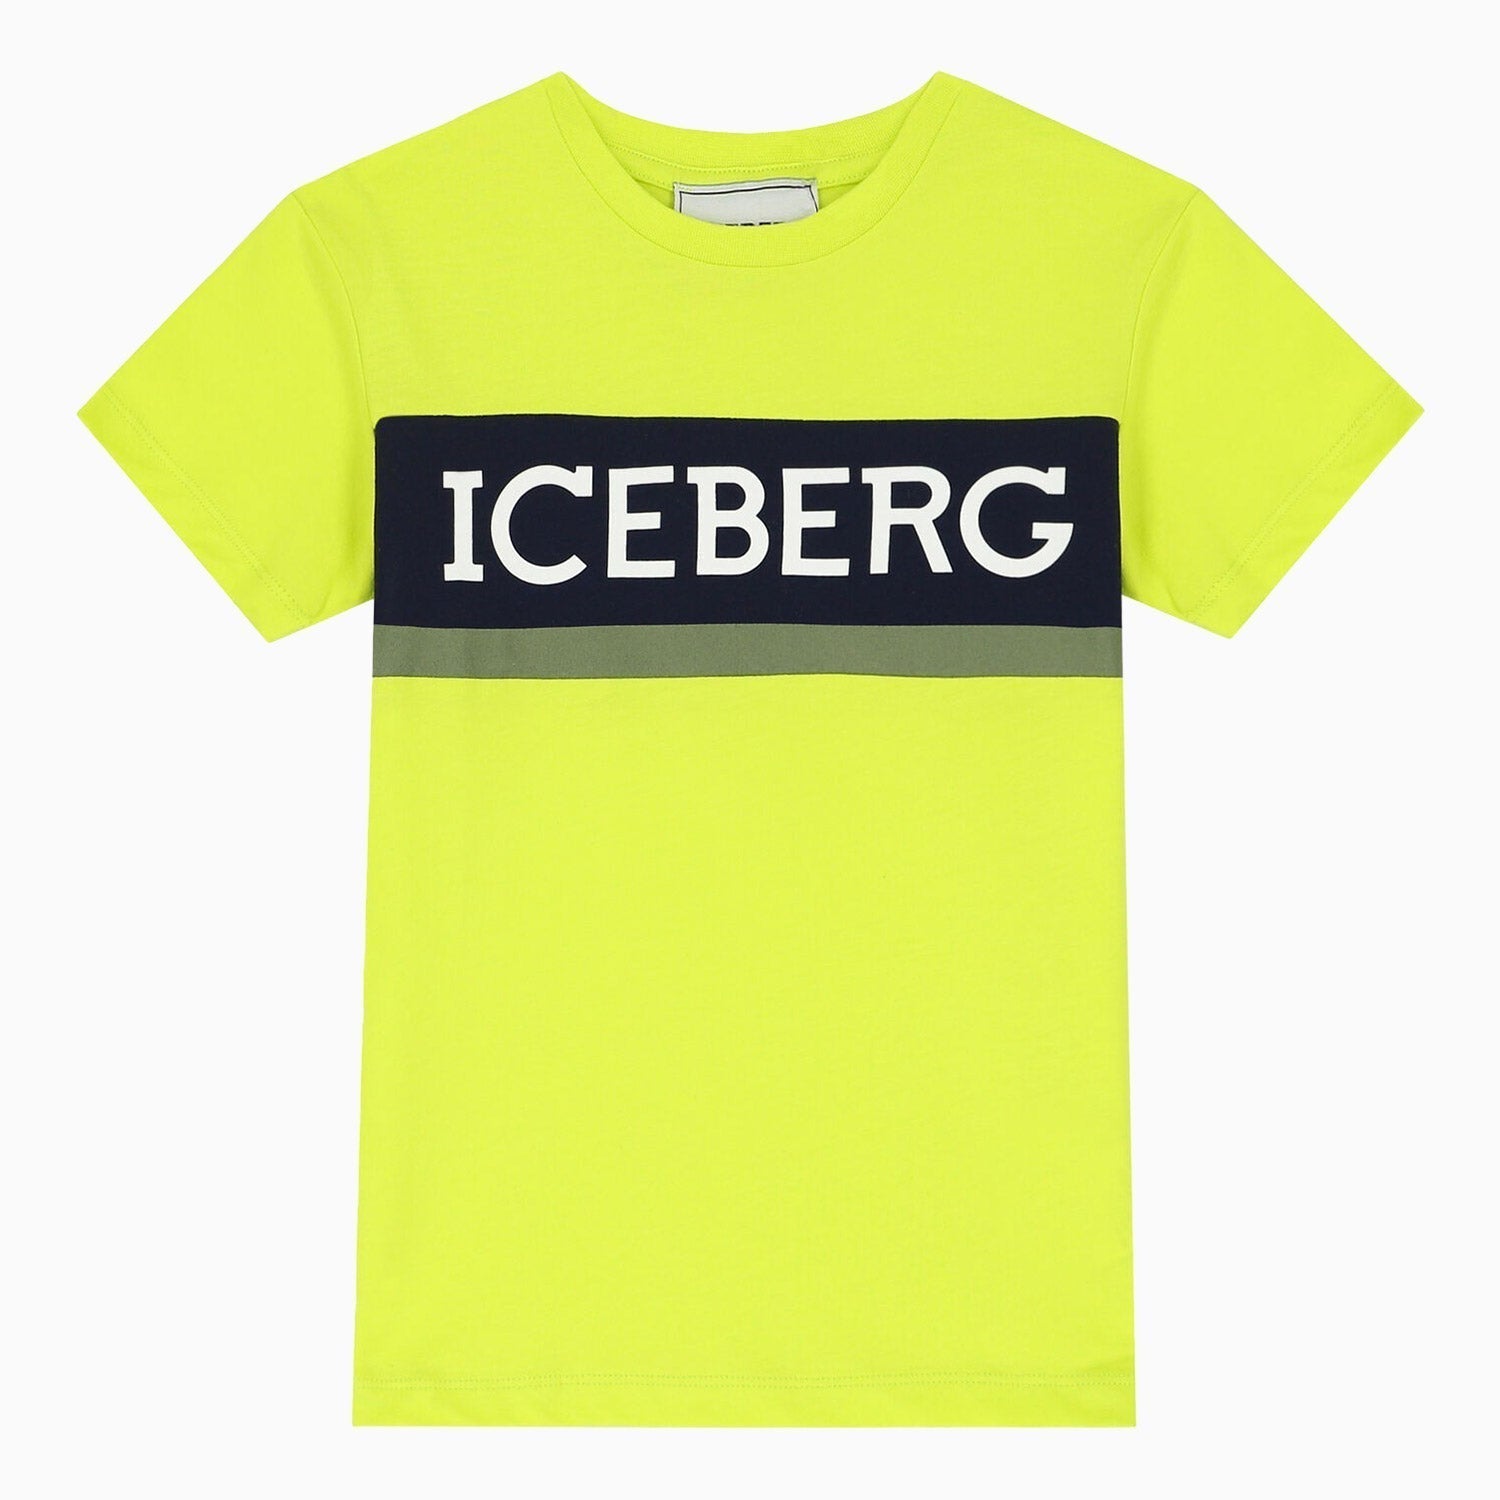 Iceberg Kid's T Shirt Toddlers - Color: Lime - Kids Premium Clothing -